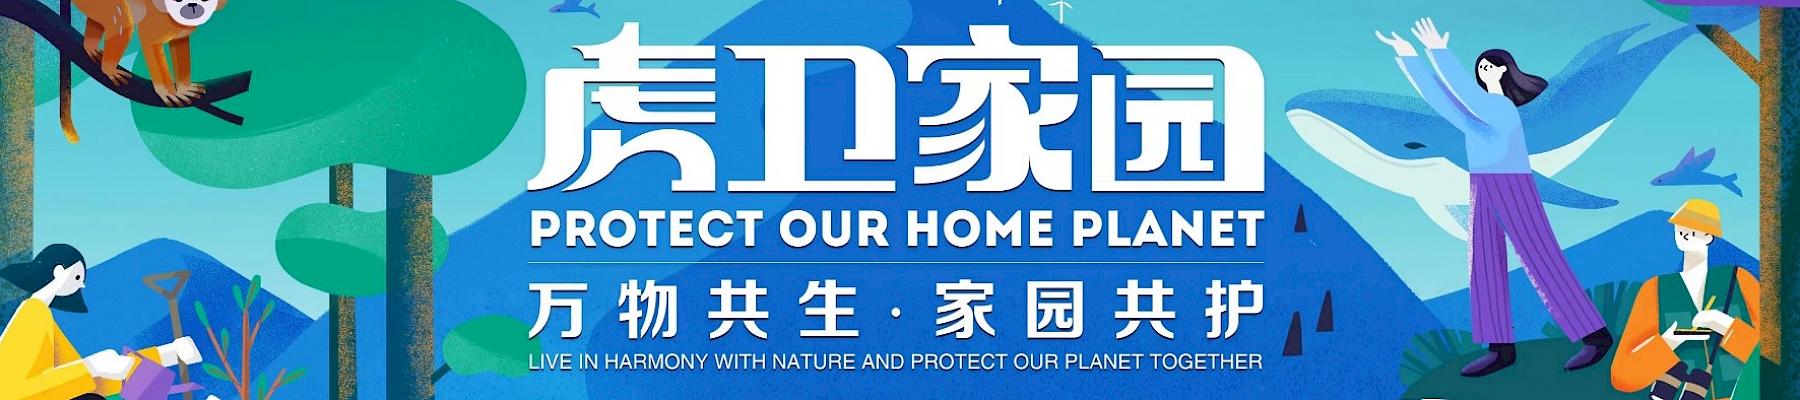 Huya's ‘Protect Our Home Planet' Campaign